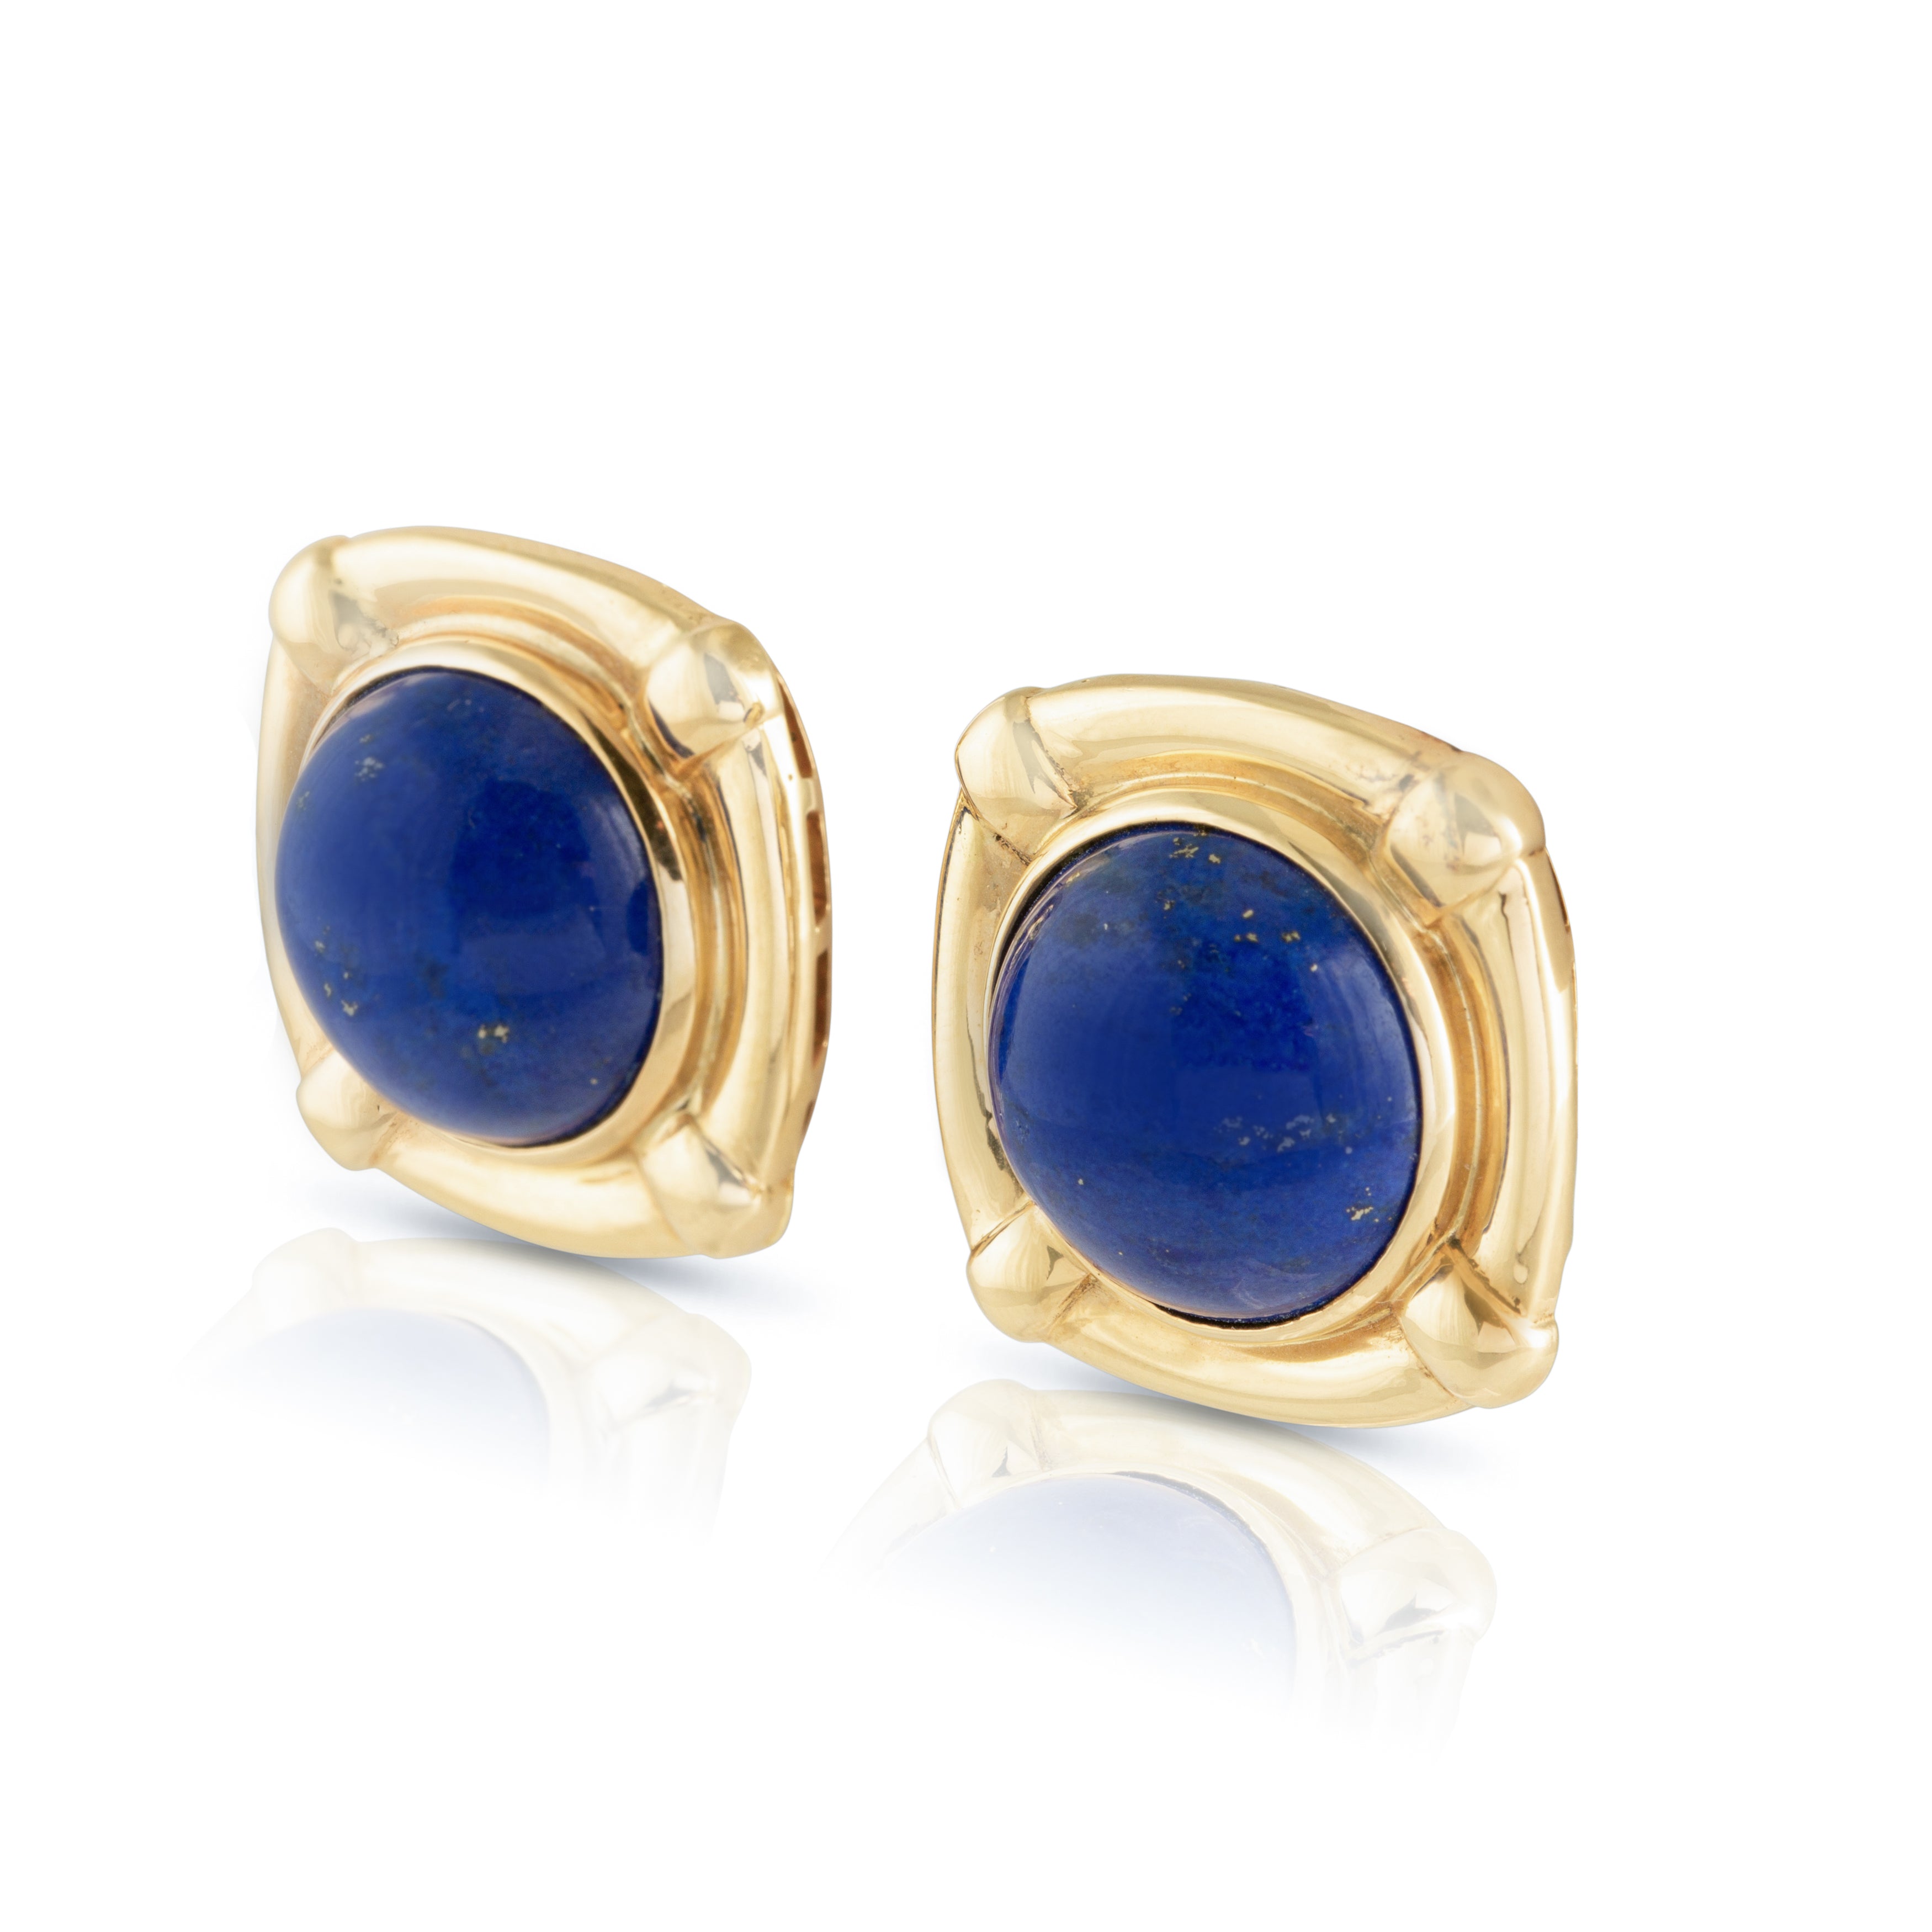 Side view of vintage lapis lazuli earrings from the 1980s-1990s. 